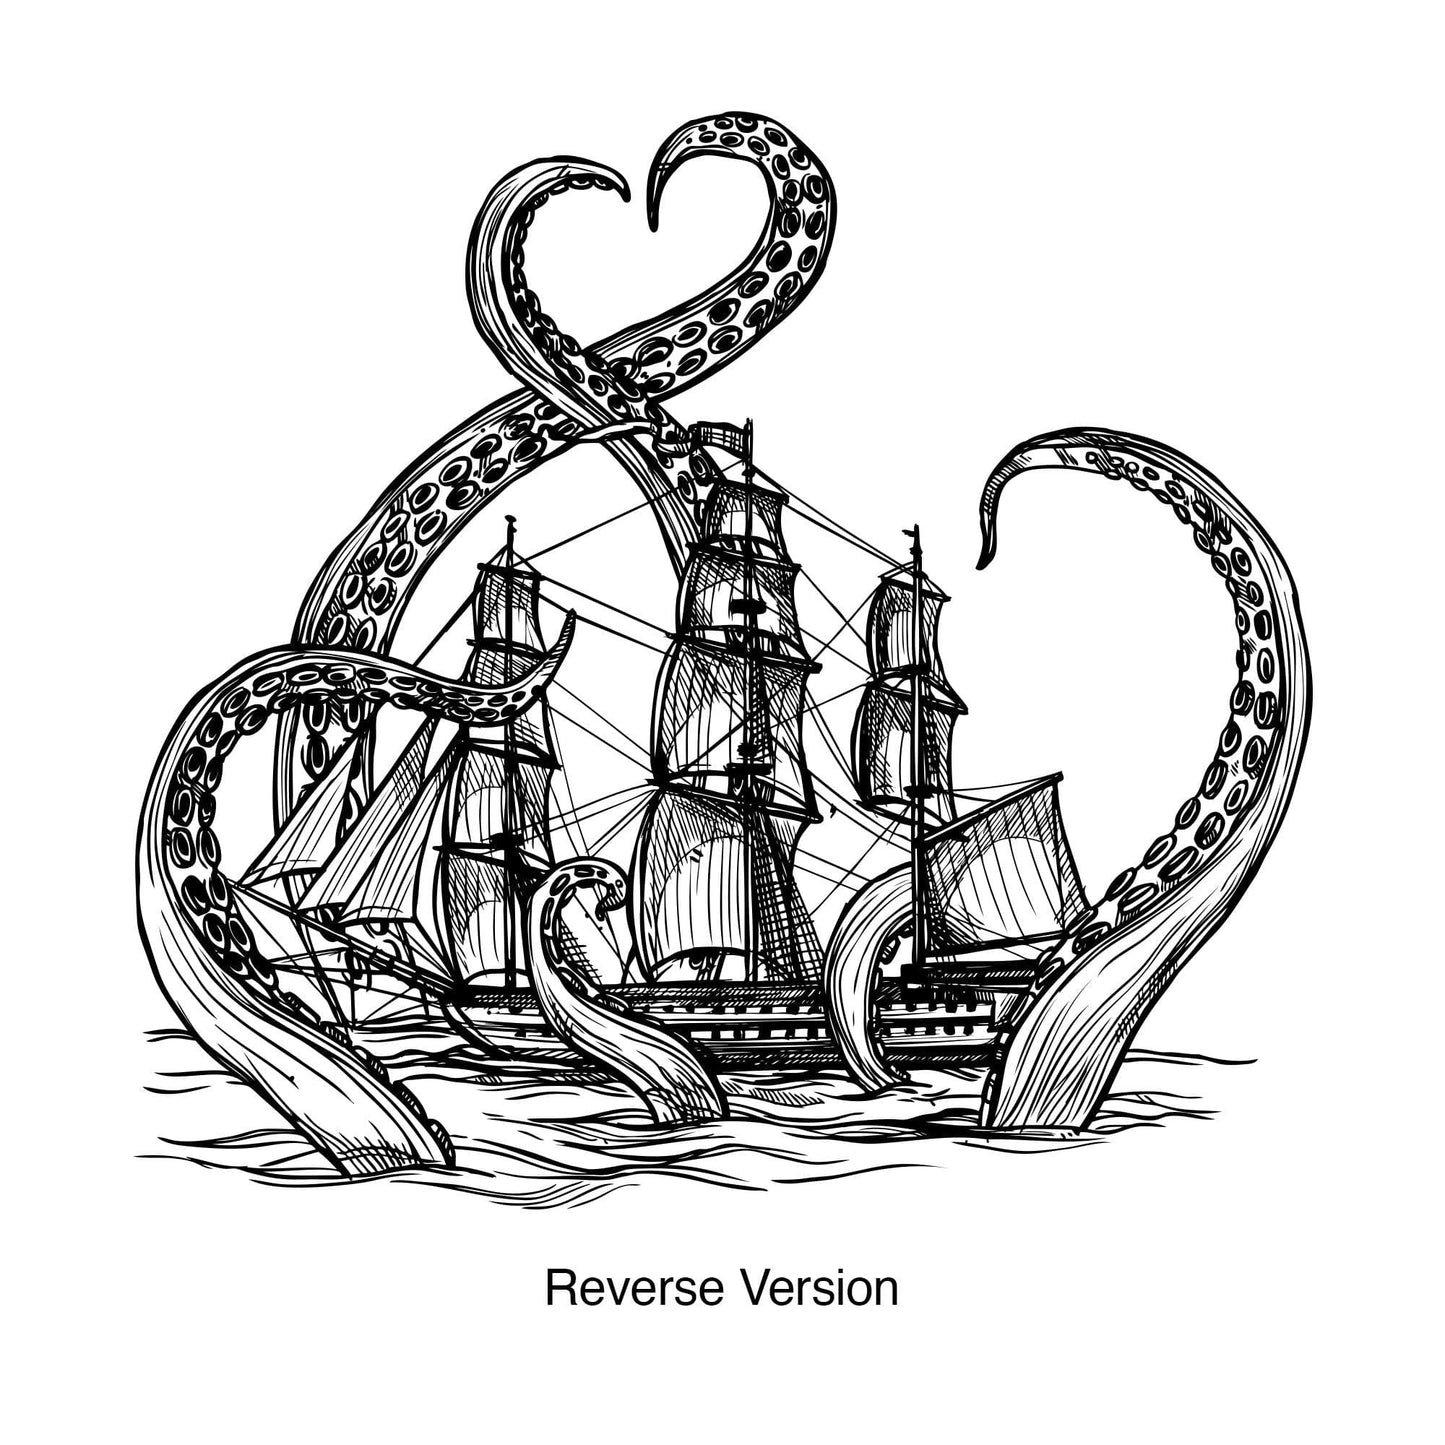 Adventure with Kraken Attacking Ship Wall Decal Sticker. #6784